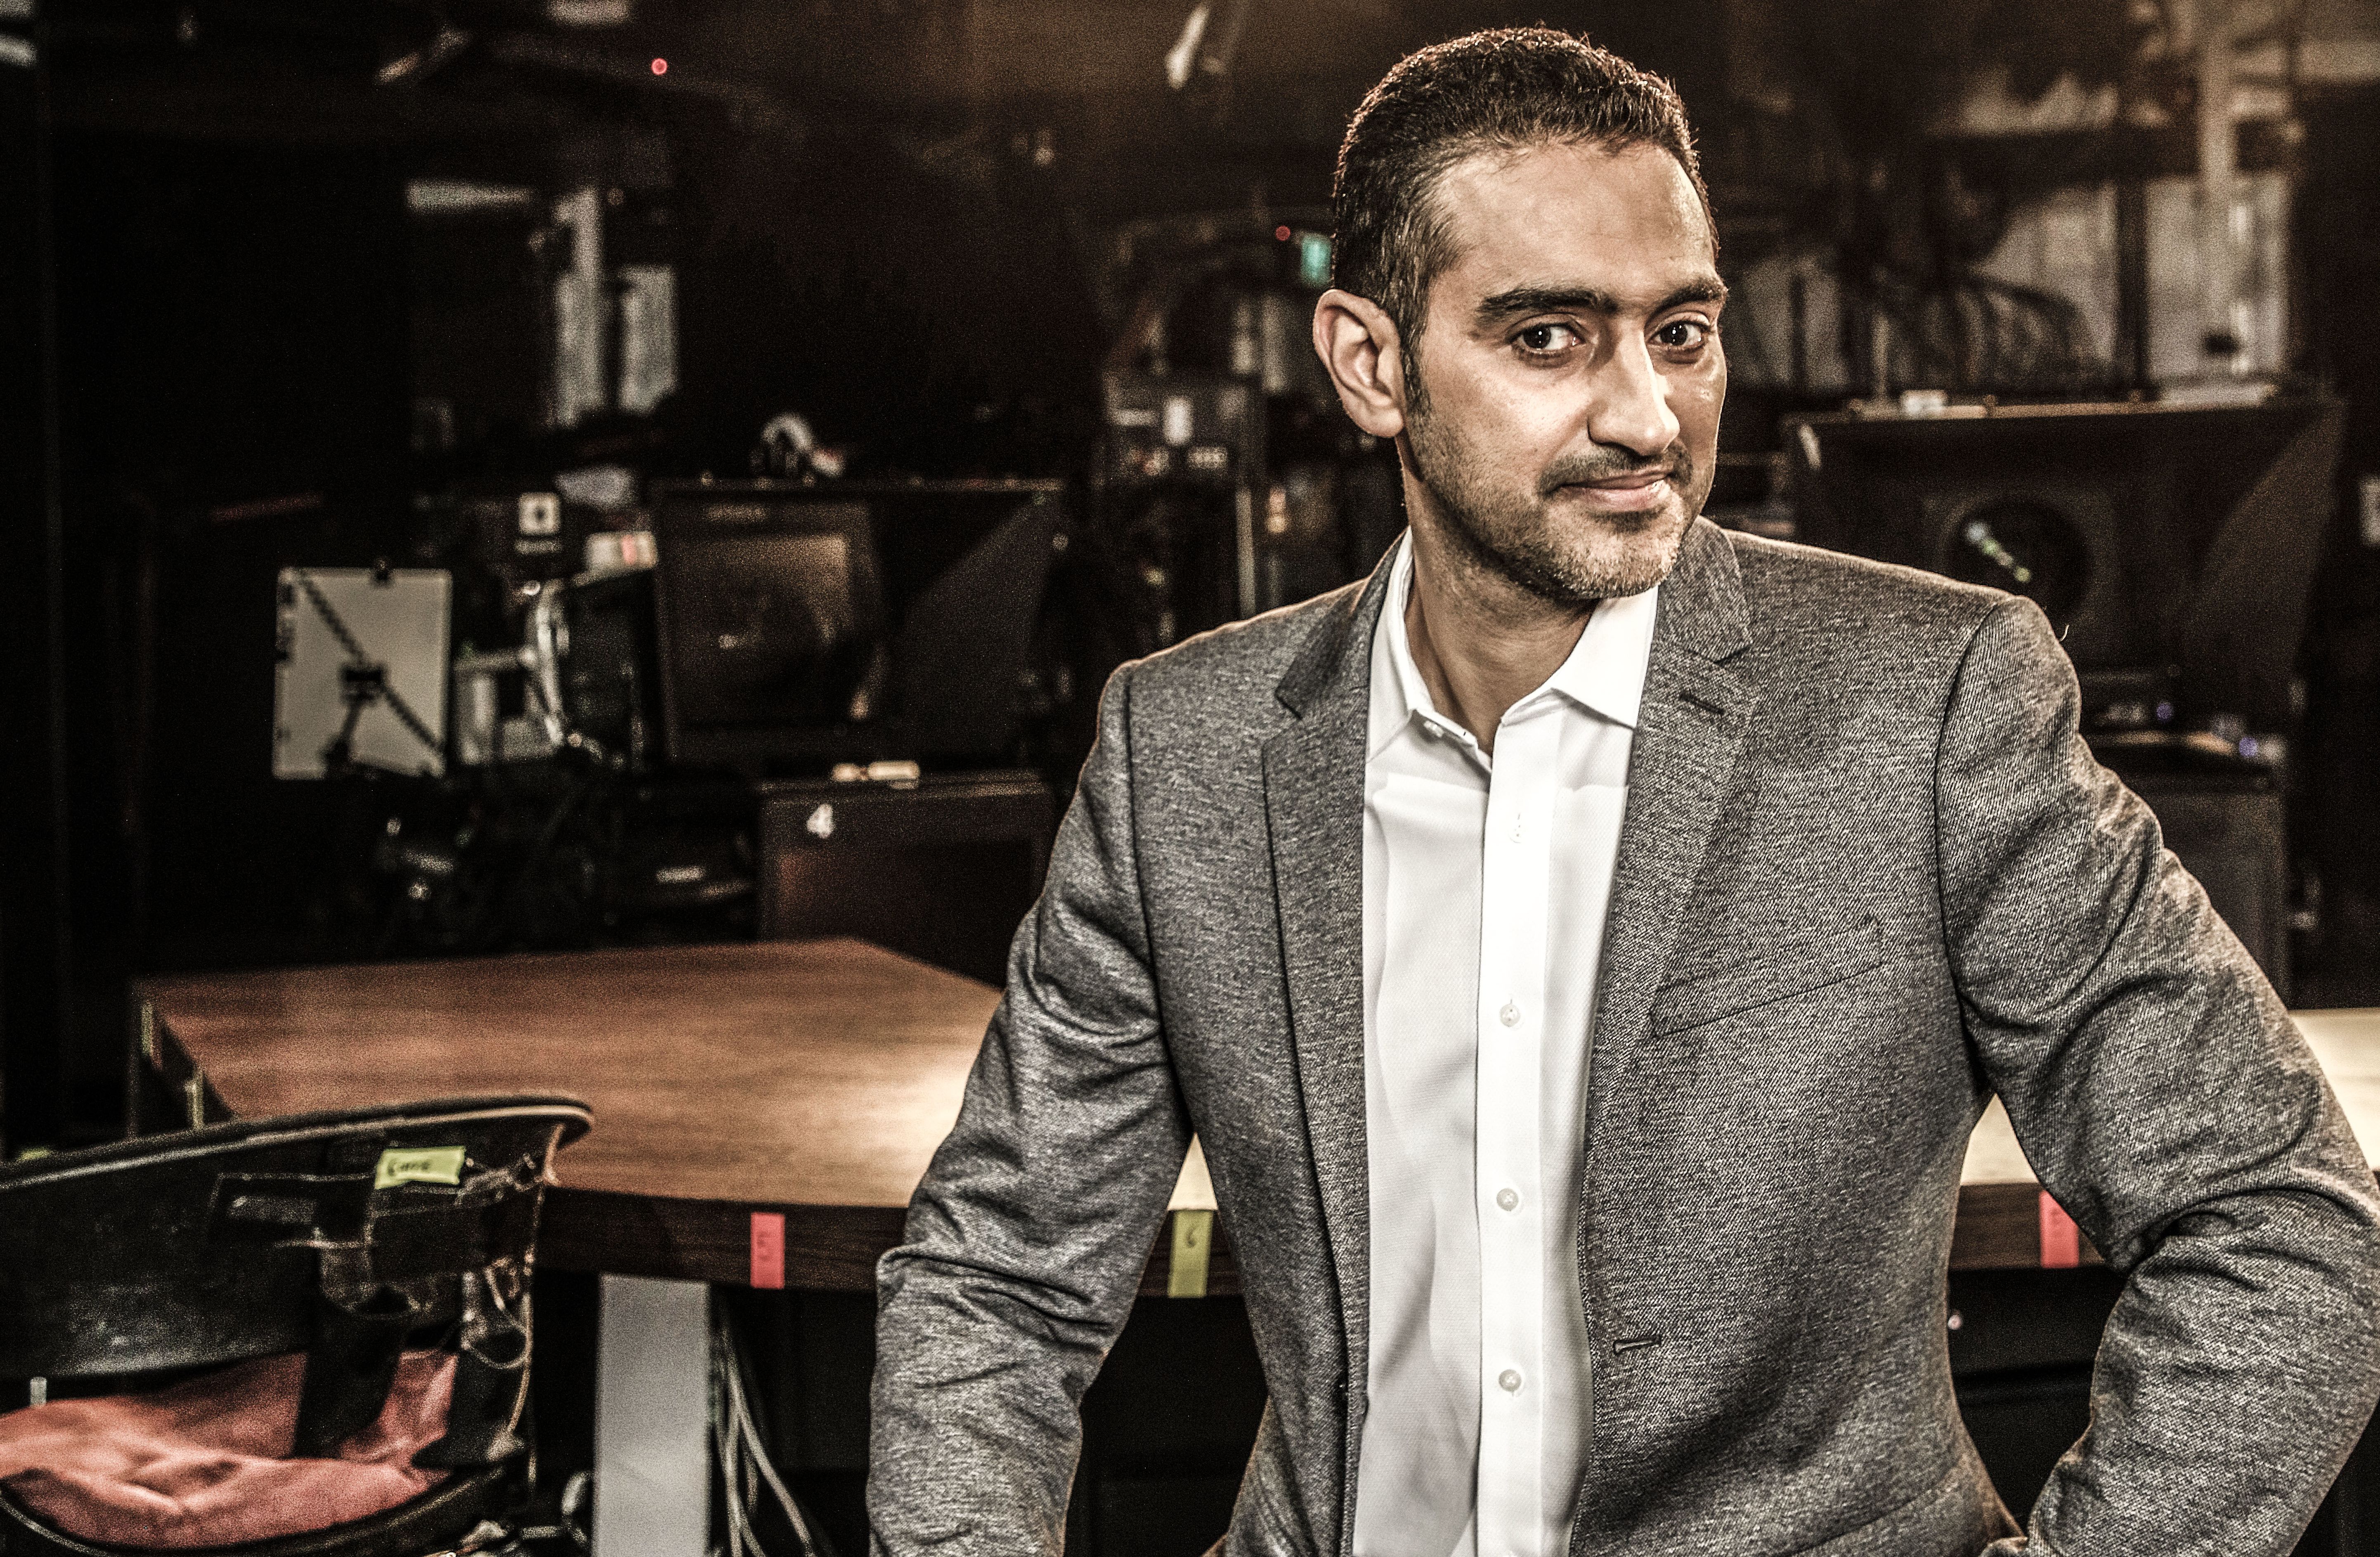 Waleed Aly: From a student newspaper in Vermont to The Project desk